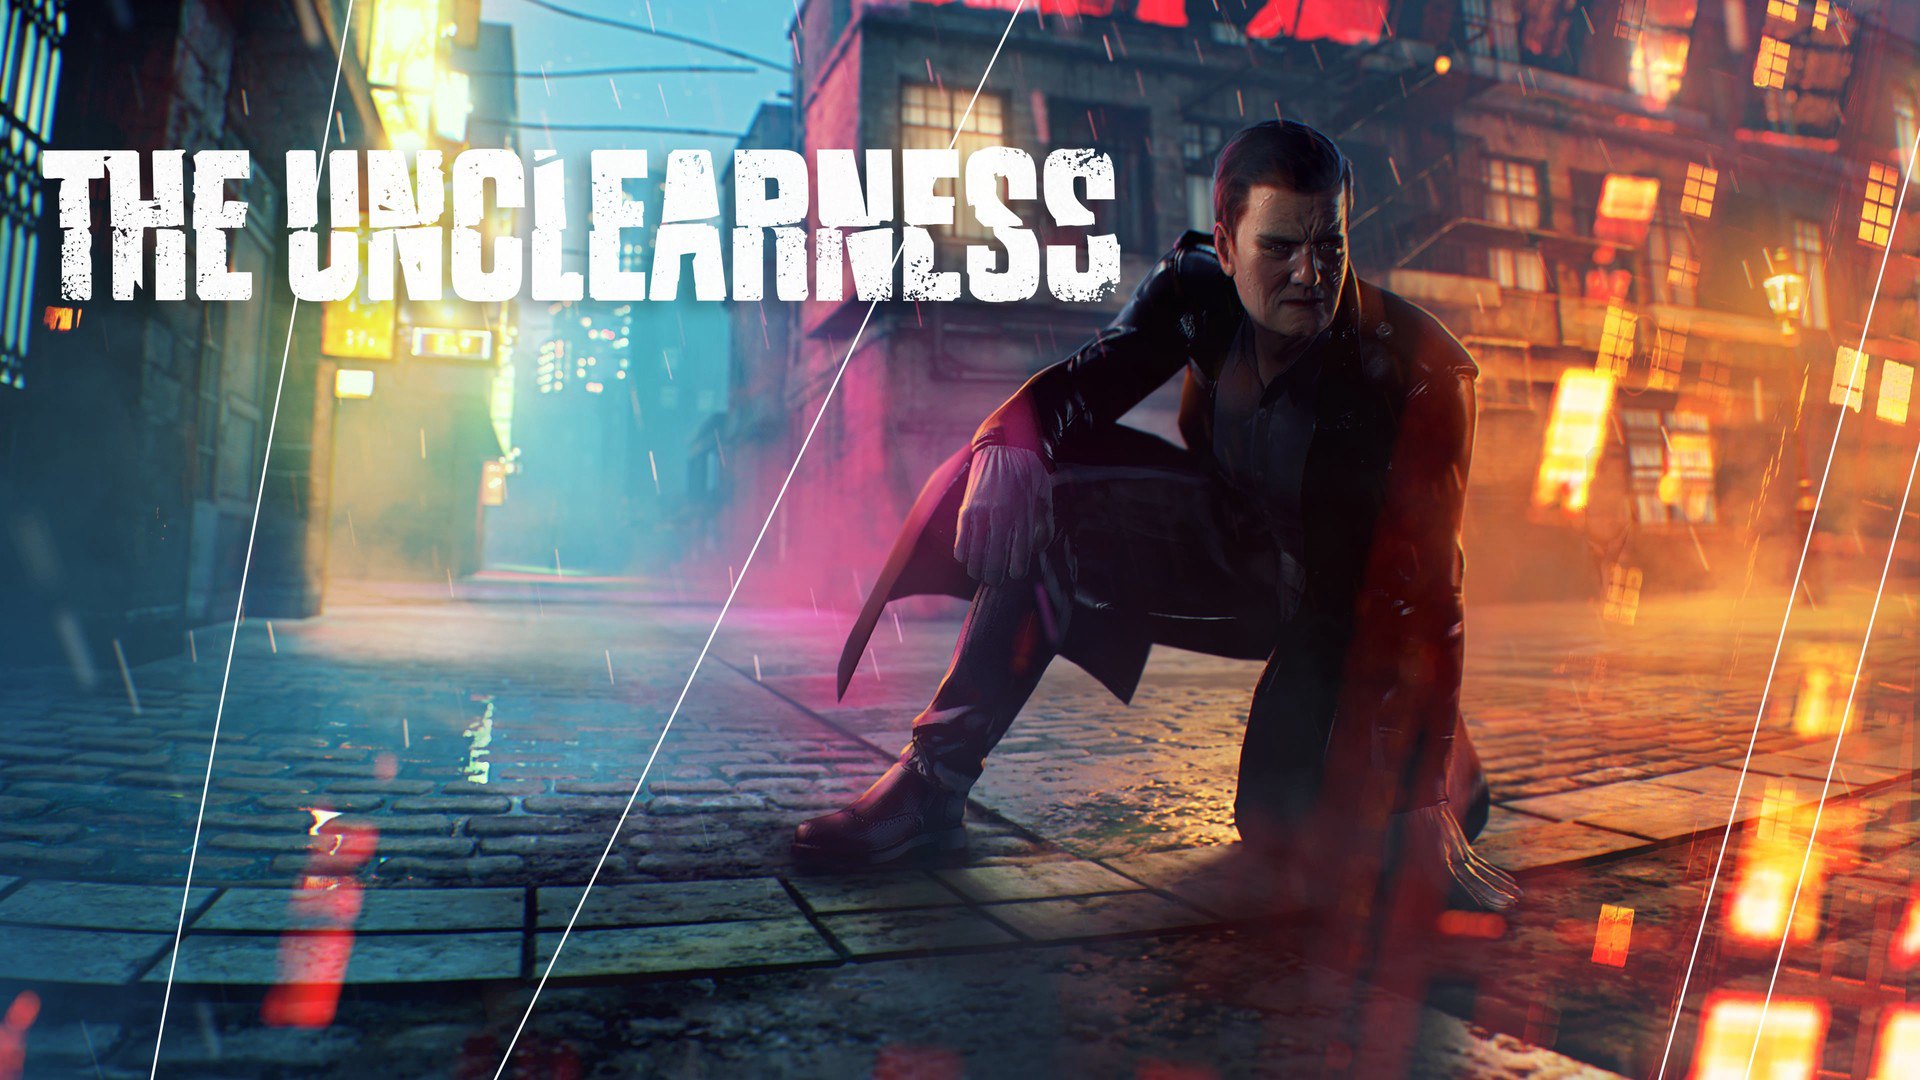 THE UNCLEARNESS Steam CD Key